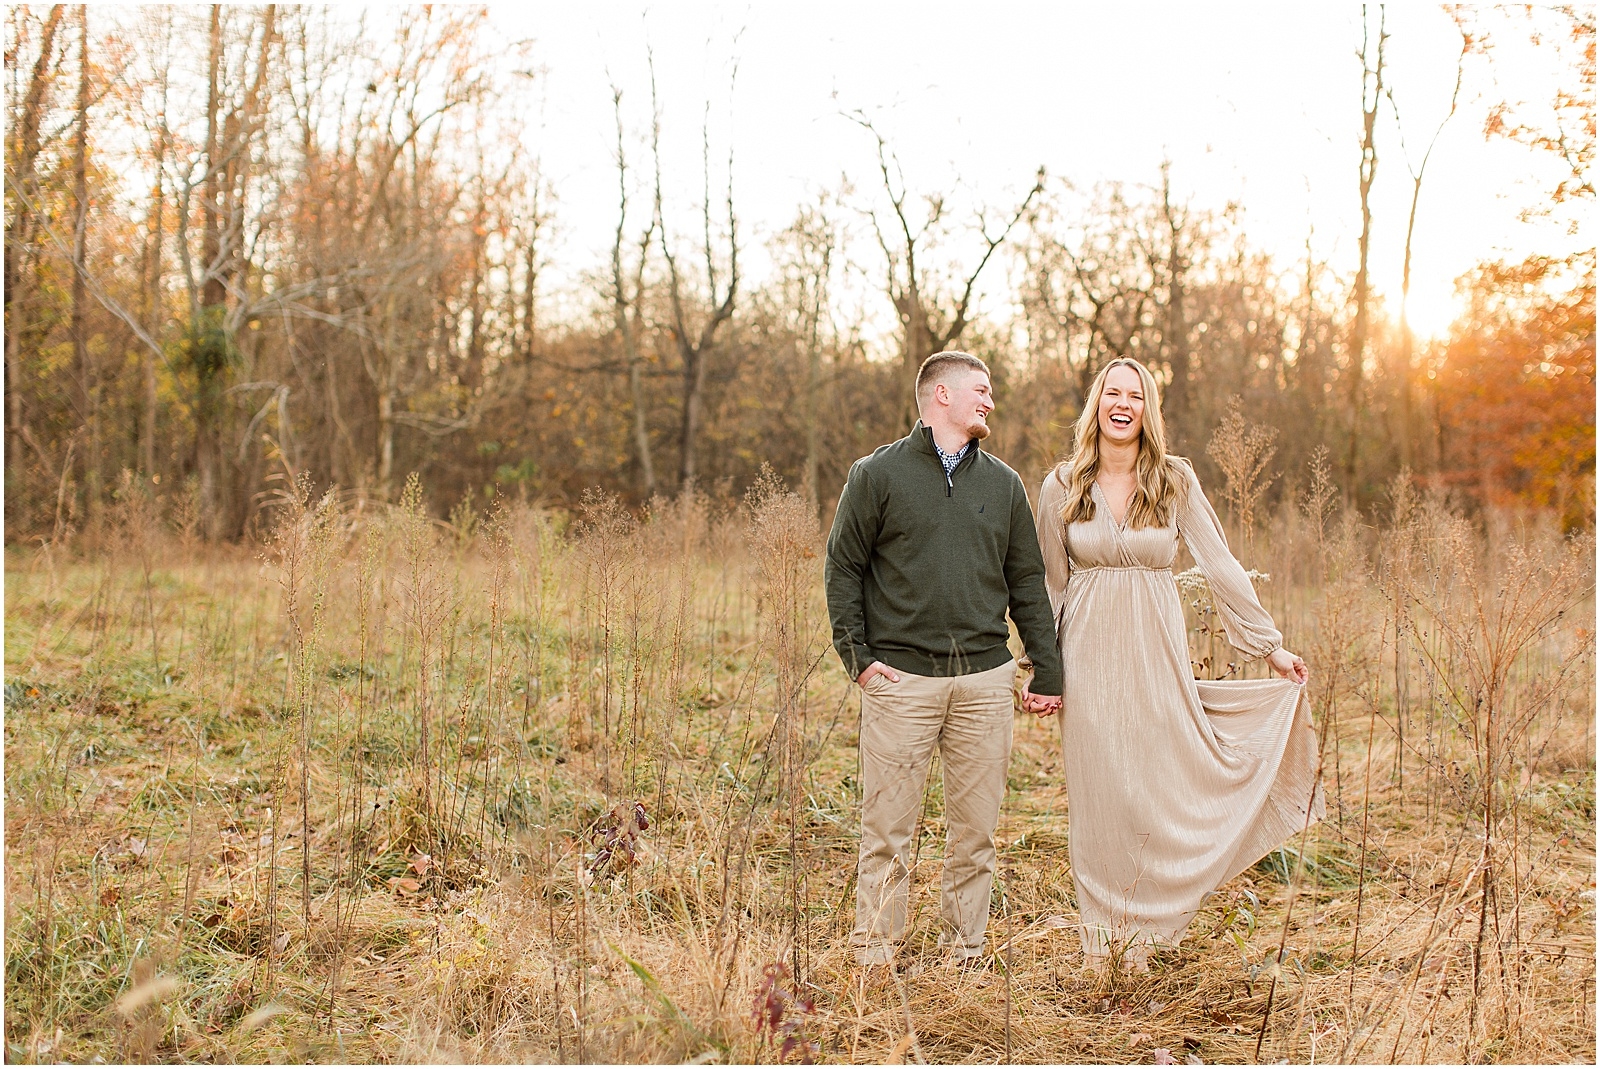 A Fall Southern Indiana Engagement Seesion | Cody and Hannah | Bret and Brandie Photography 041.jpg